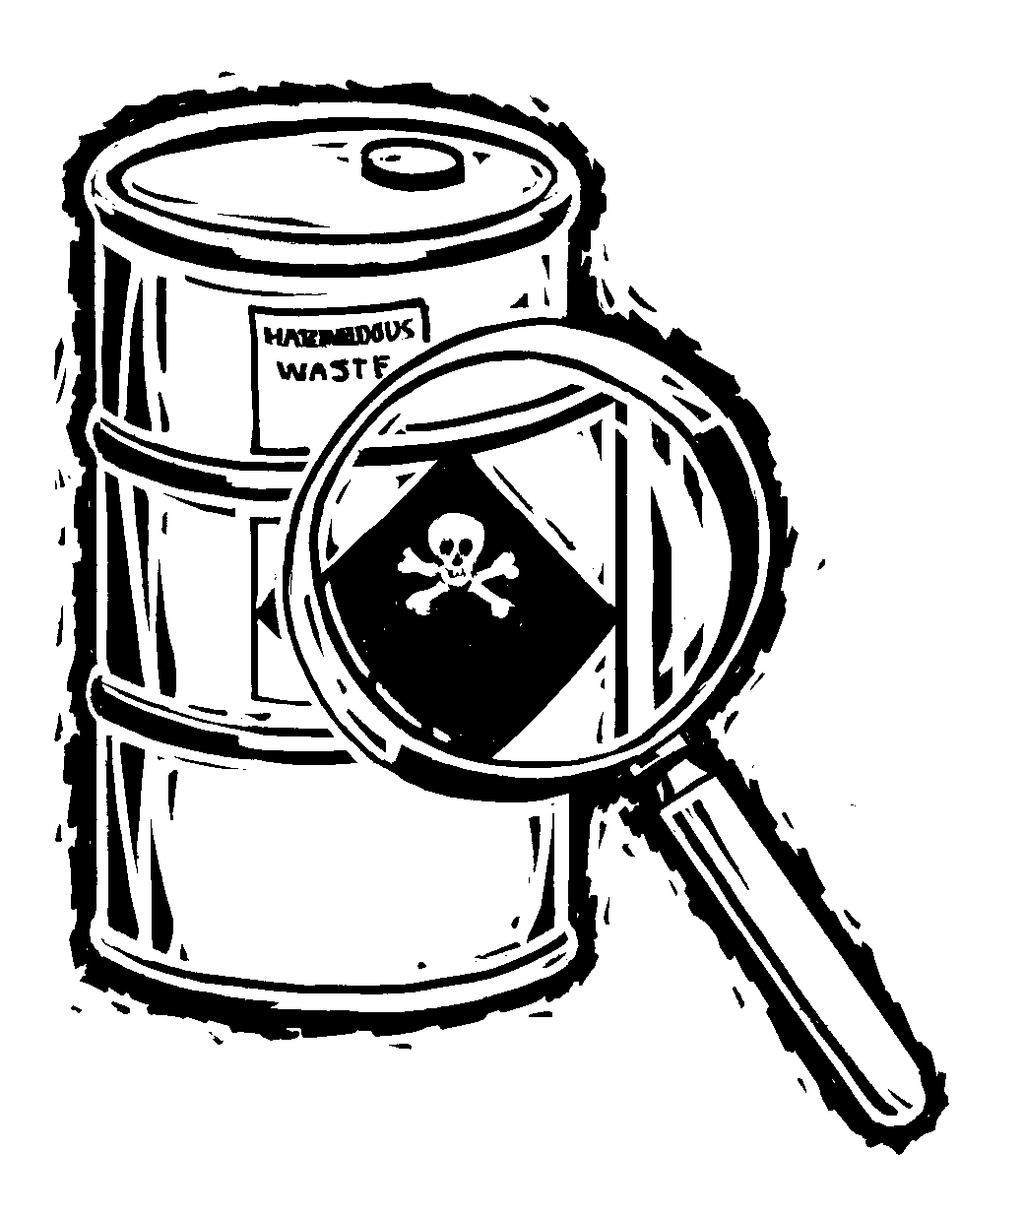 C h a p t e r 4 HOW TO CONDUCT A HAZARDOUS WASTE DETERMINATION E ach solid waste must be evaluated to determine if it is a hazardous